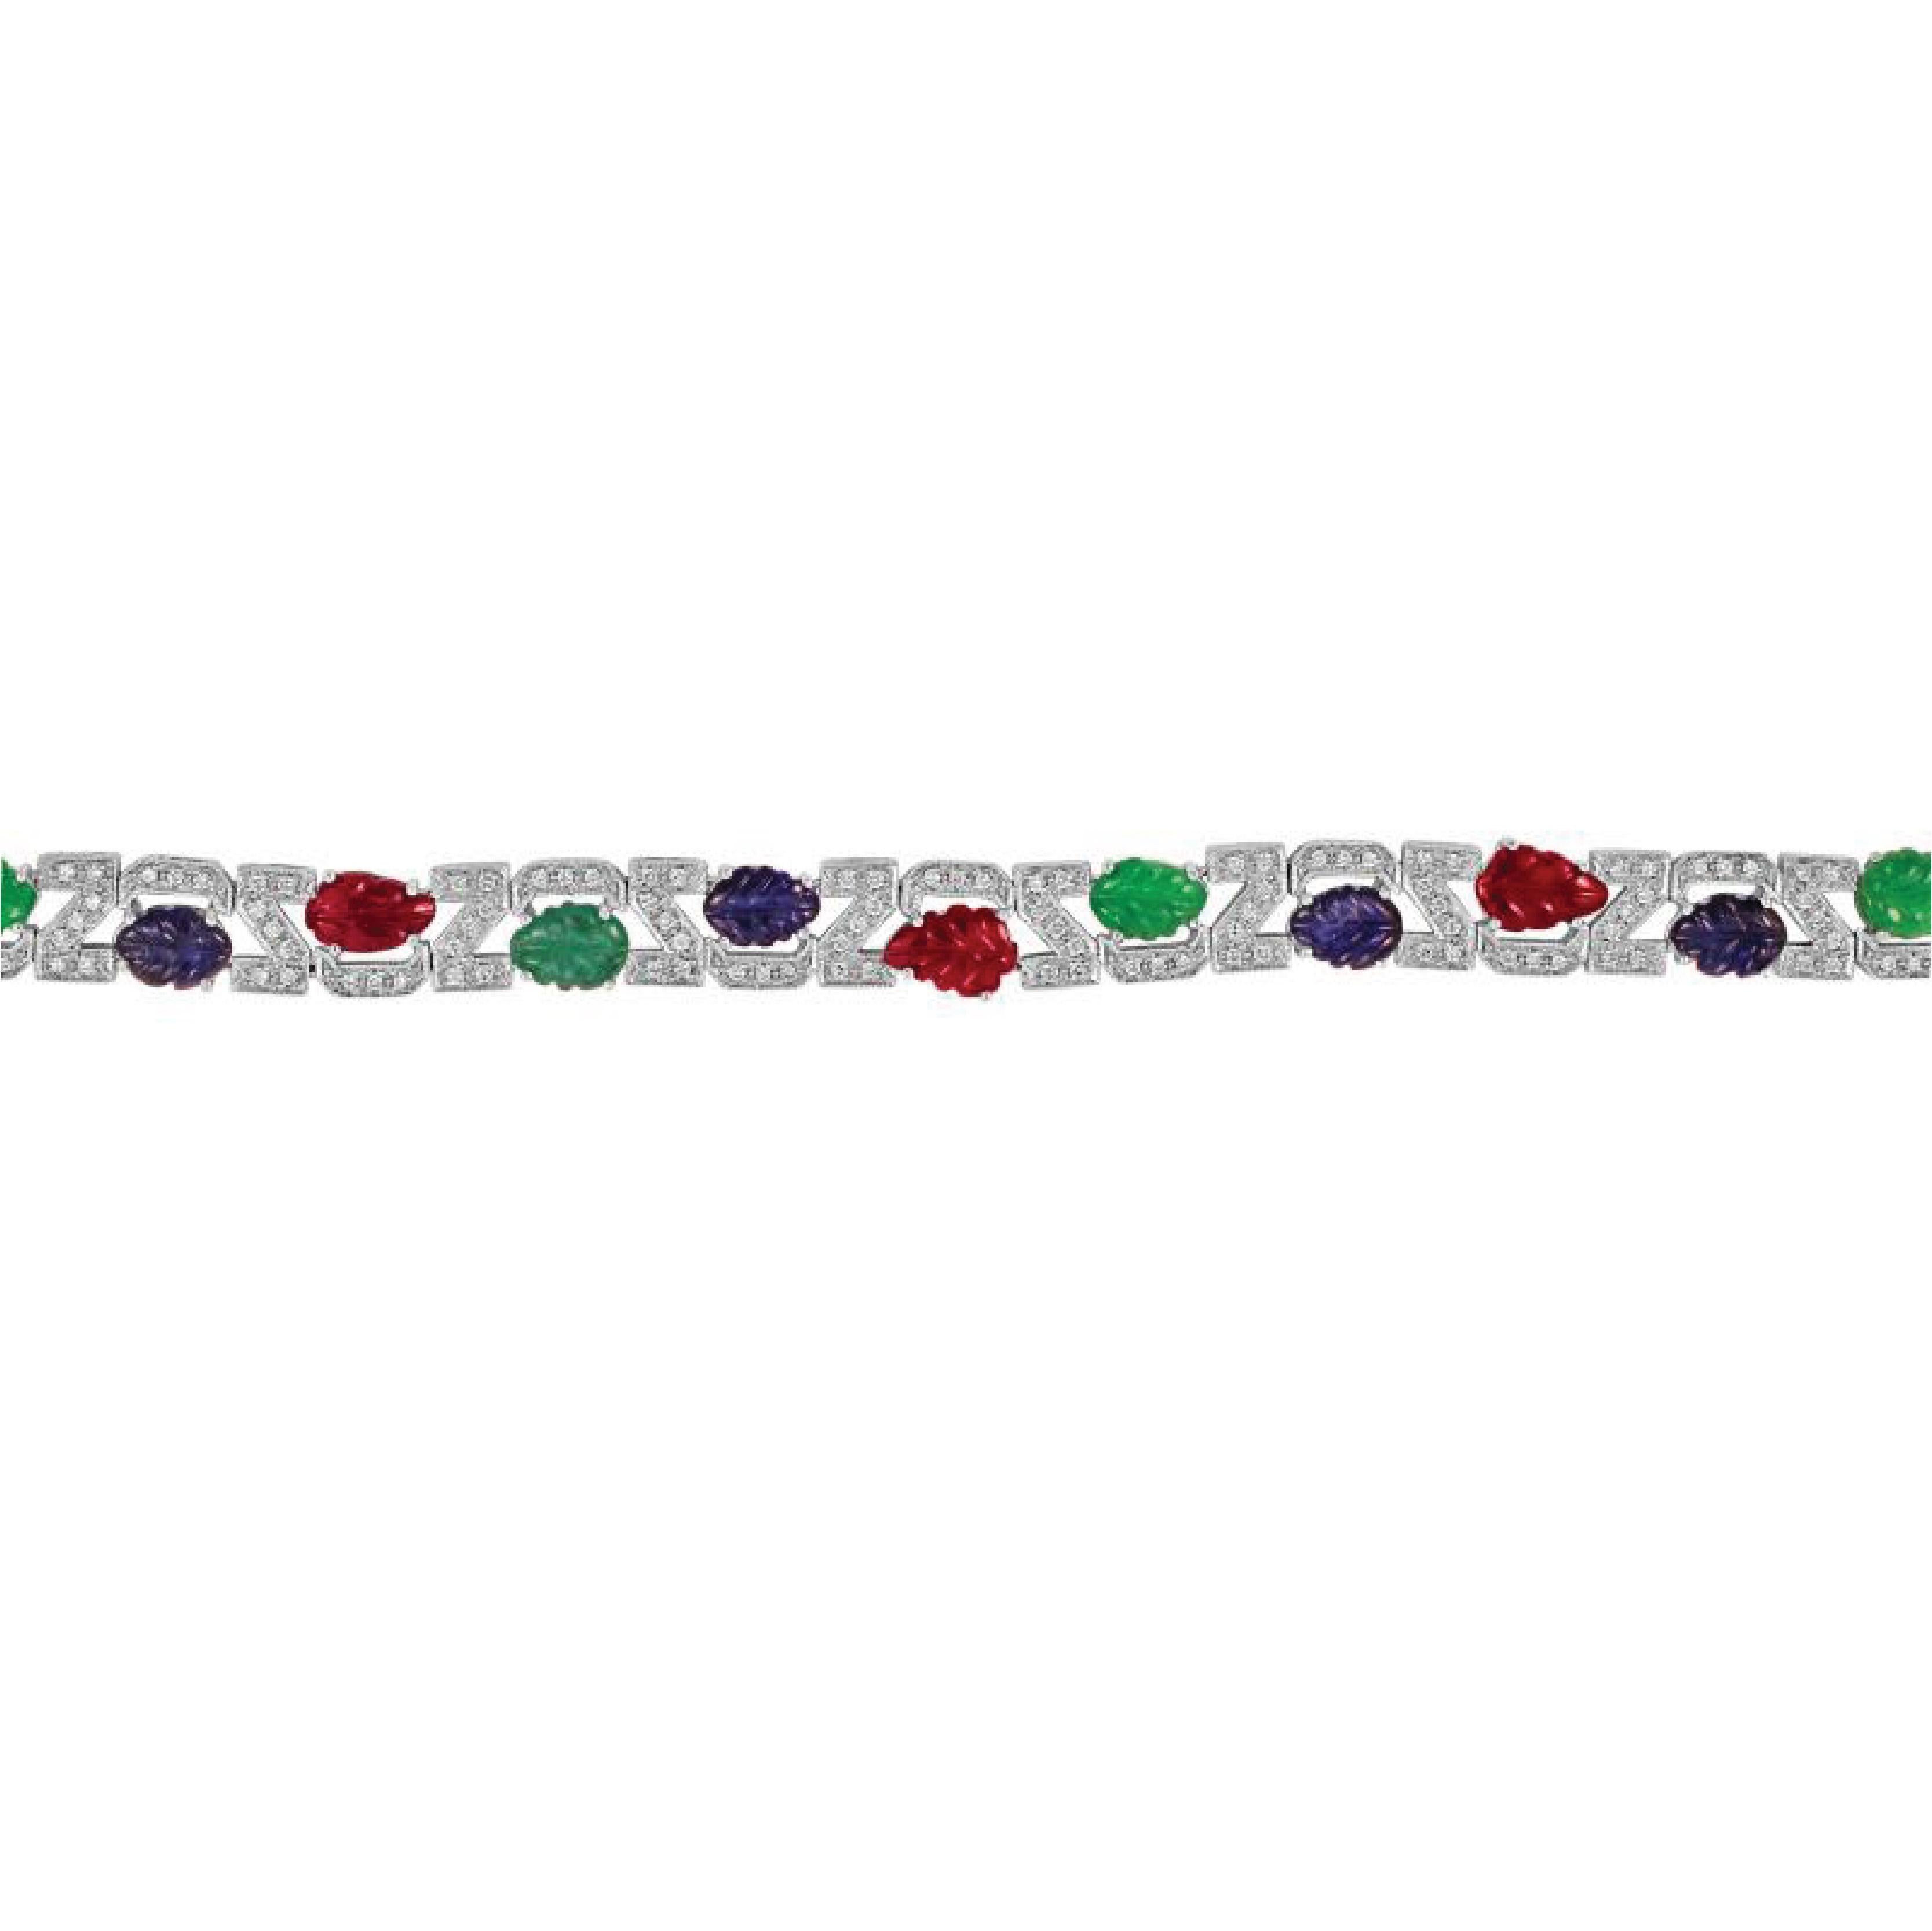 Platinum Set Bracelet consisting of Diamonds weighing 1.10ct with 5 Red Rubies 4.56ct, 4 Green Emeralds 3.57ct, and 4 Blue Sapphires 5.93ct in a Leaf Design

Sophia D by Joseph Dardashti LTD has been known worldwide for 35 years and are inspired by